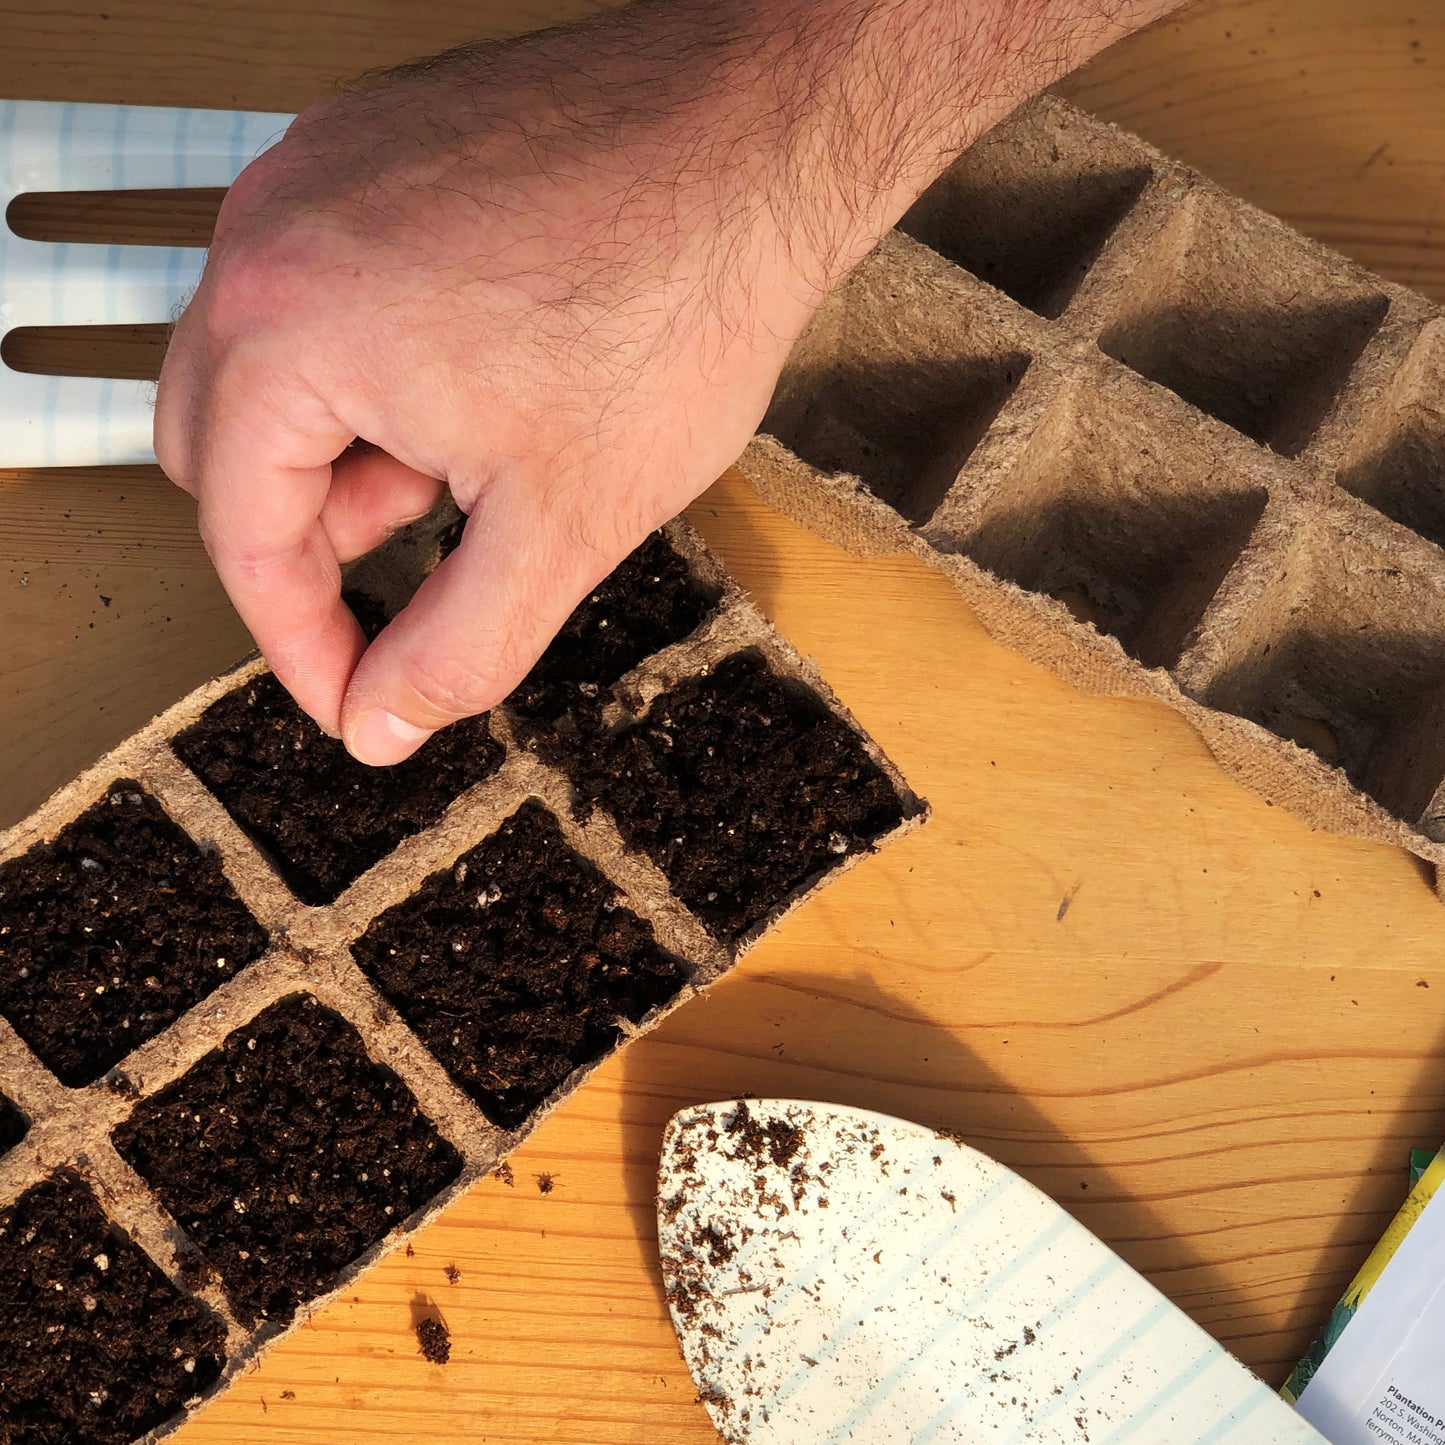 Planting National Pickling Cucumber Seeds into Jiffy seed starting peat strip trays filled with Jiffy mix.